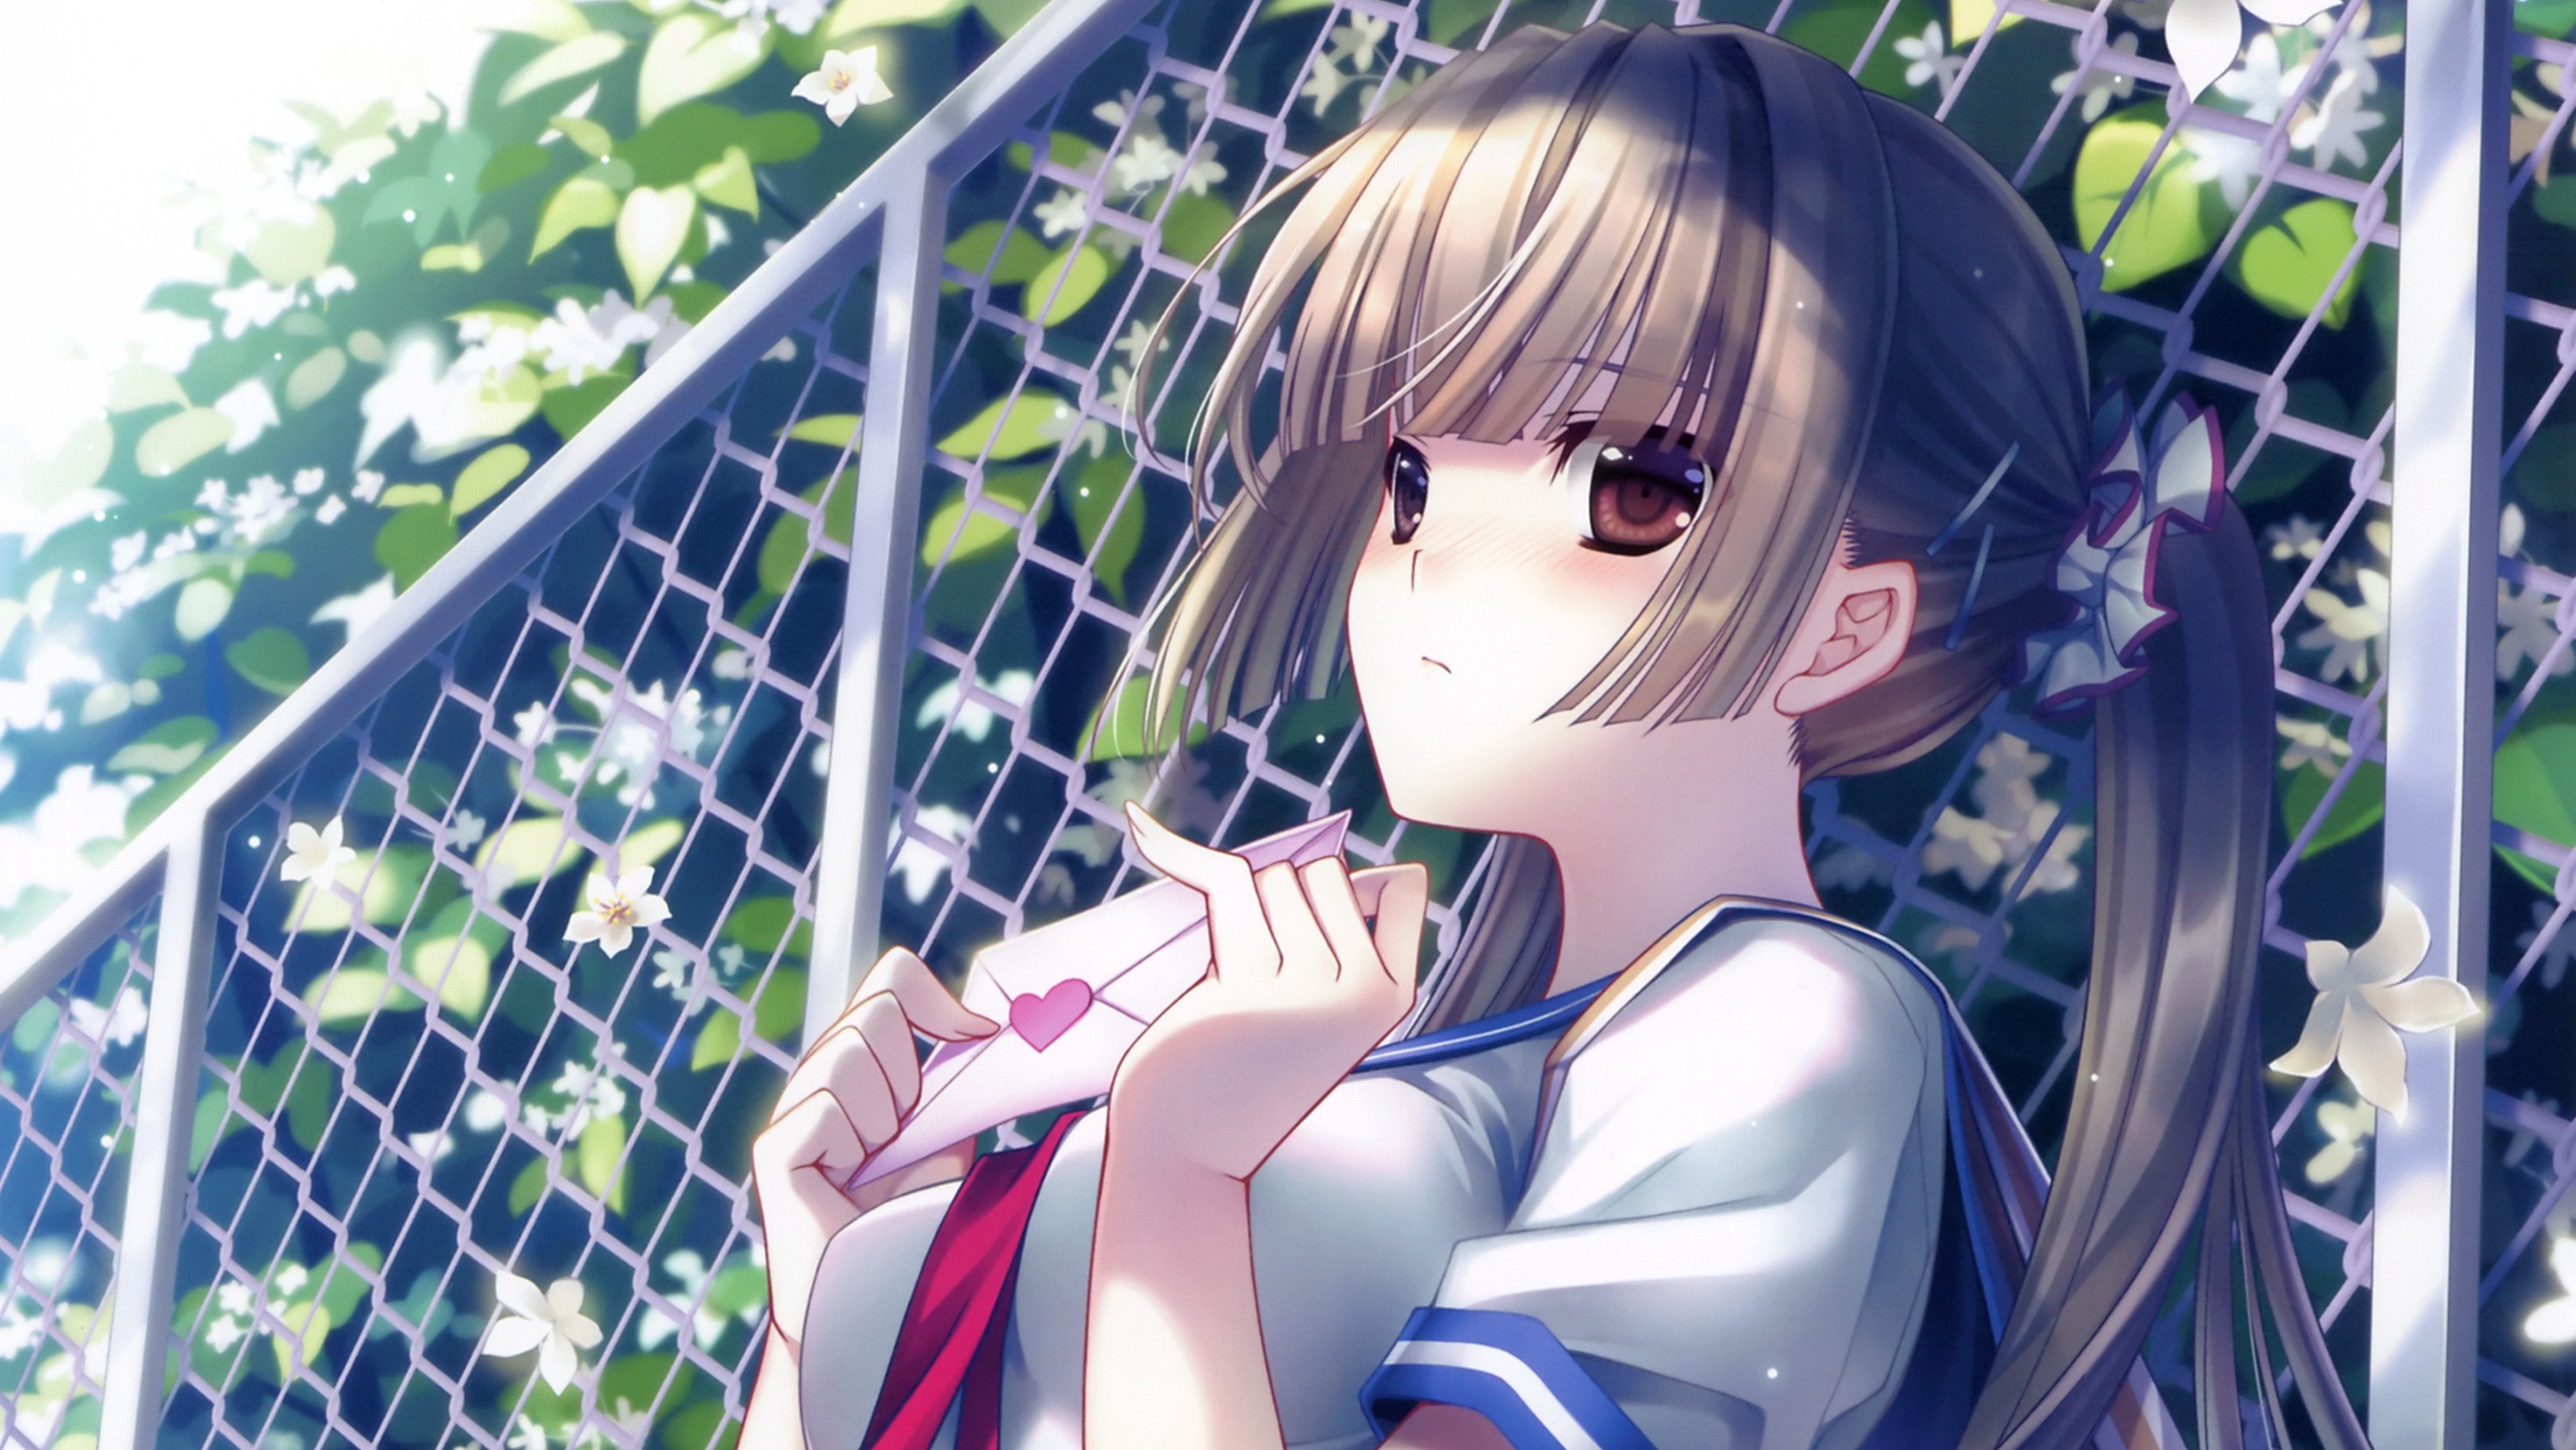 blondes, Close up, Fences, School, Uniforms, Schoolgirls, Long, Hair, Outdoors, Brown, Eyes, Blossoms, Letters, Anime, Ponytails, Anime, Girls, Hime, Cut, Bushes, Sailor, Uniforms, Hair, Ornaments, Hair, Pins, O Wallpaper